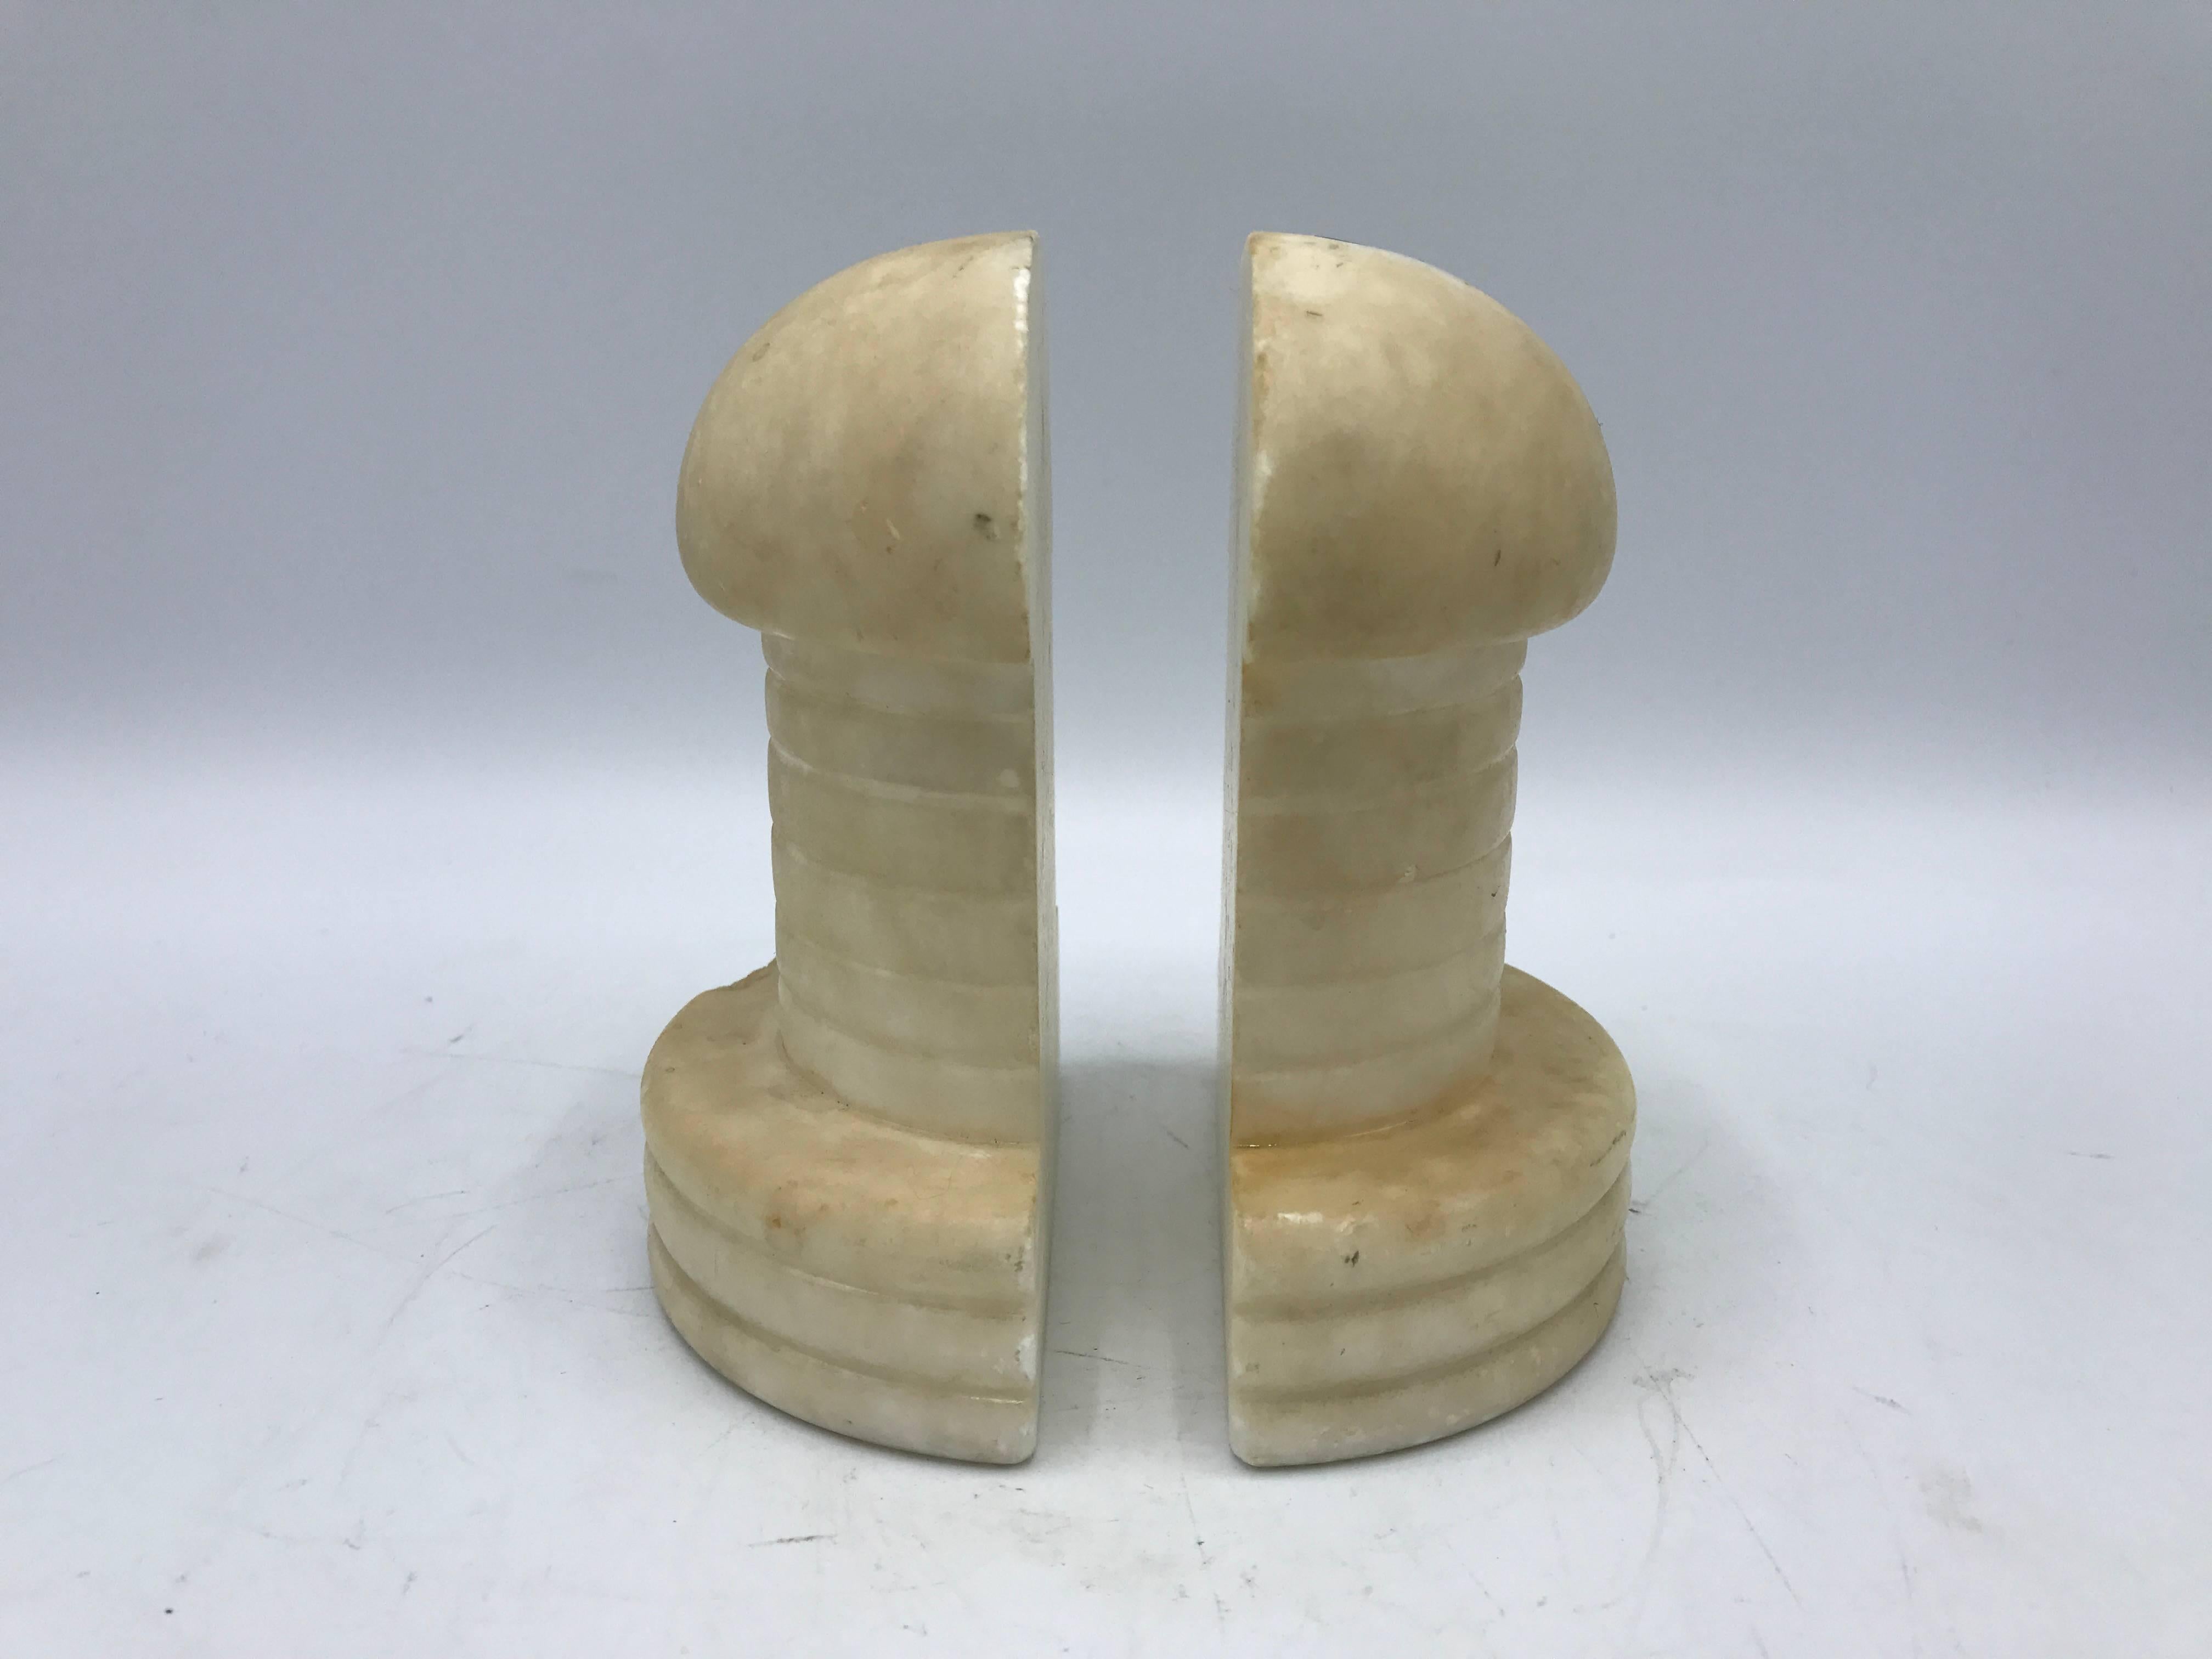 Offered is a beautiful, pair of 1960s, Italian marble bookends. Faintly marked 'Italy' on underside of each bookends.